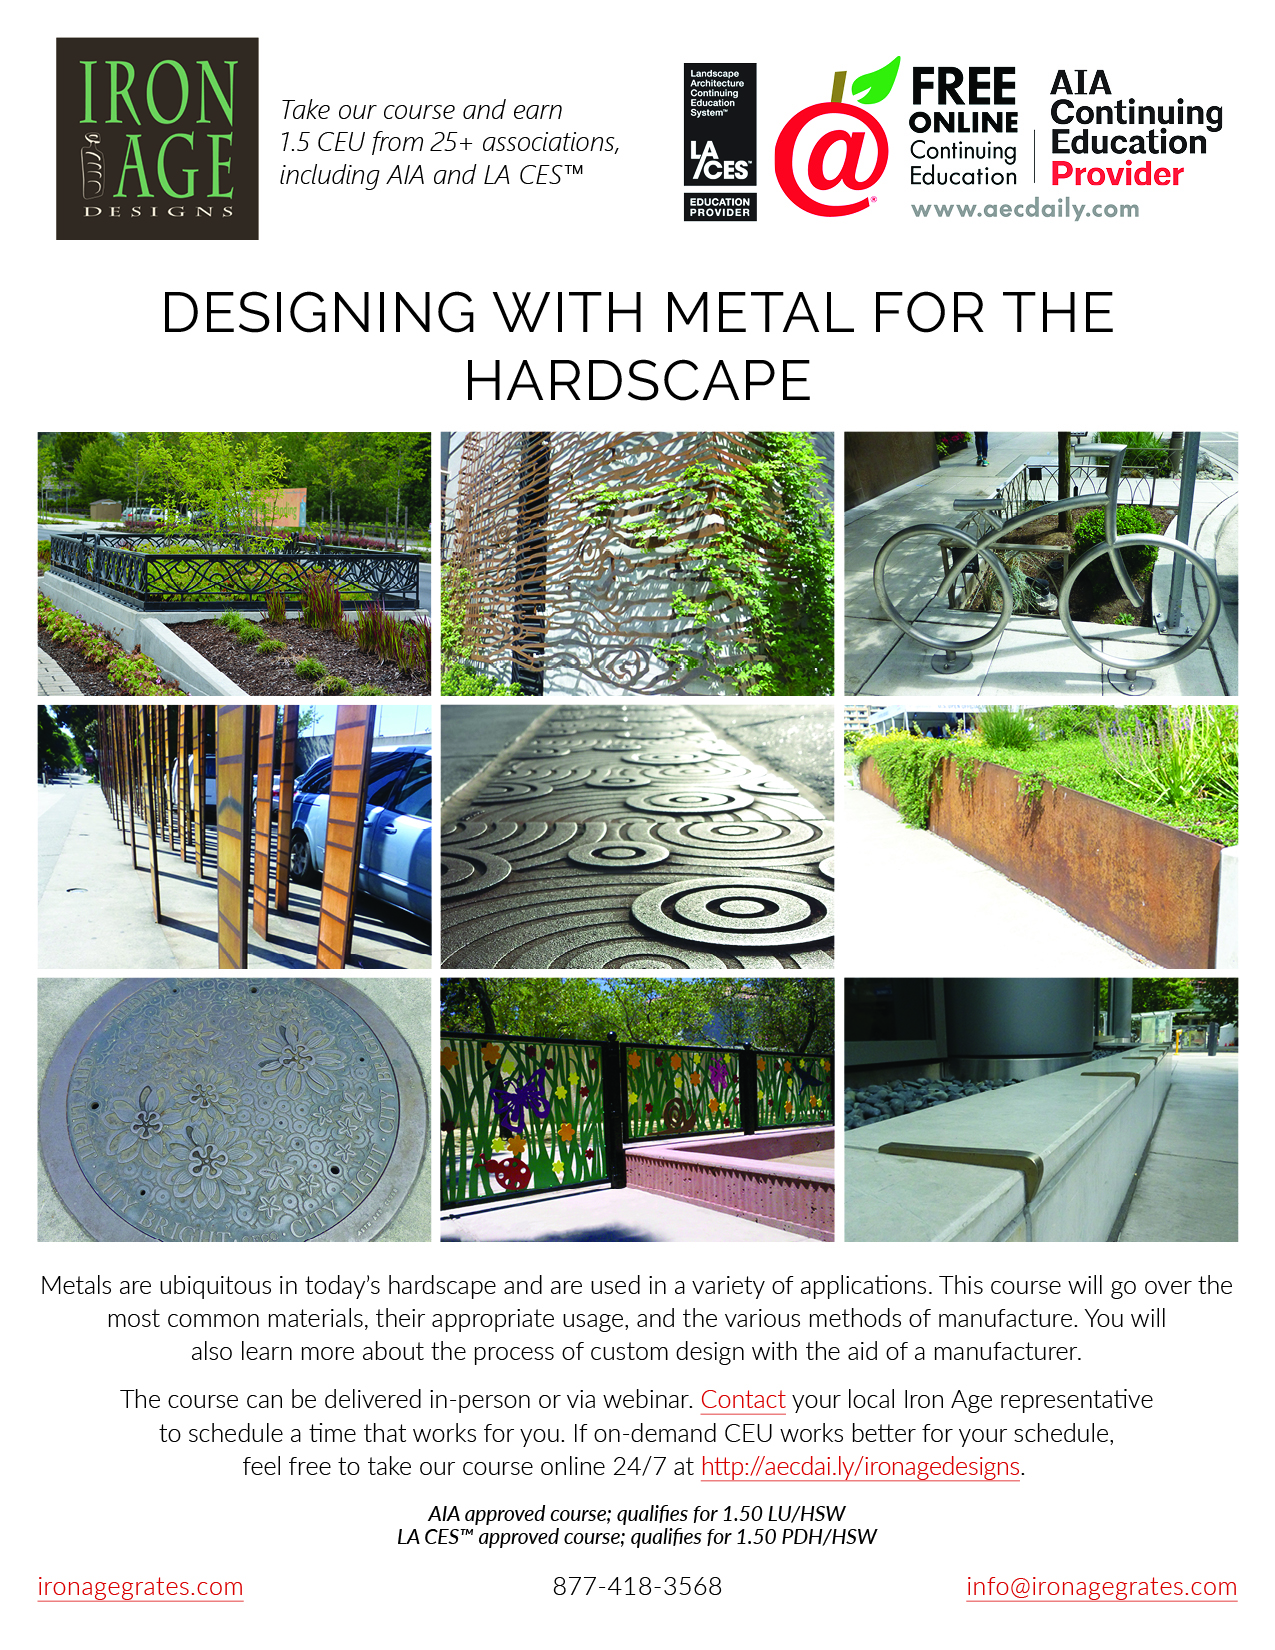 Iron Age Designs Continuing Education Flyer - Receive 1.5 CEU from AIA and LA CES